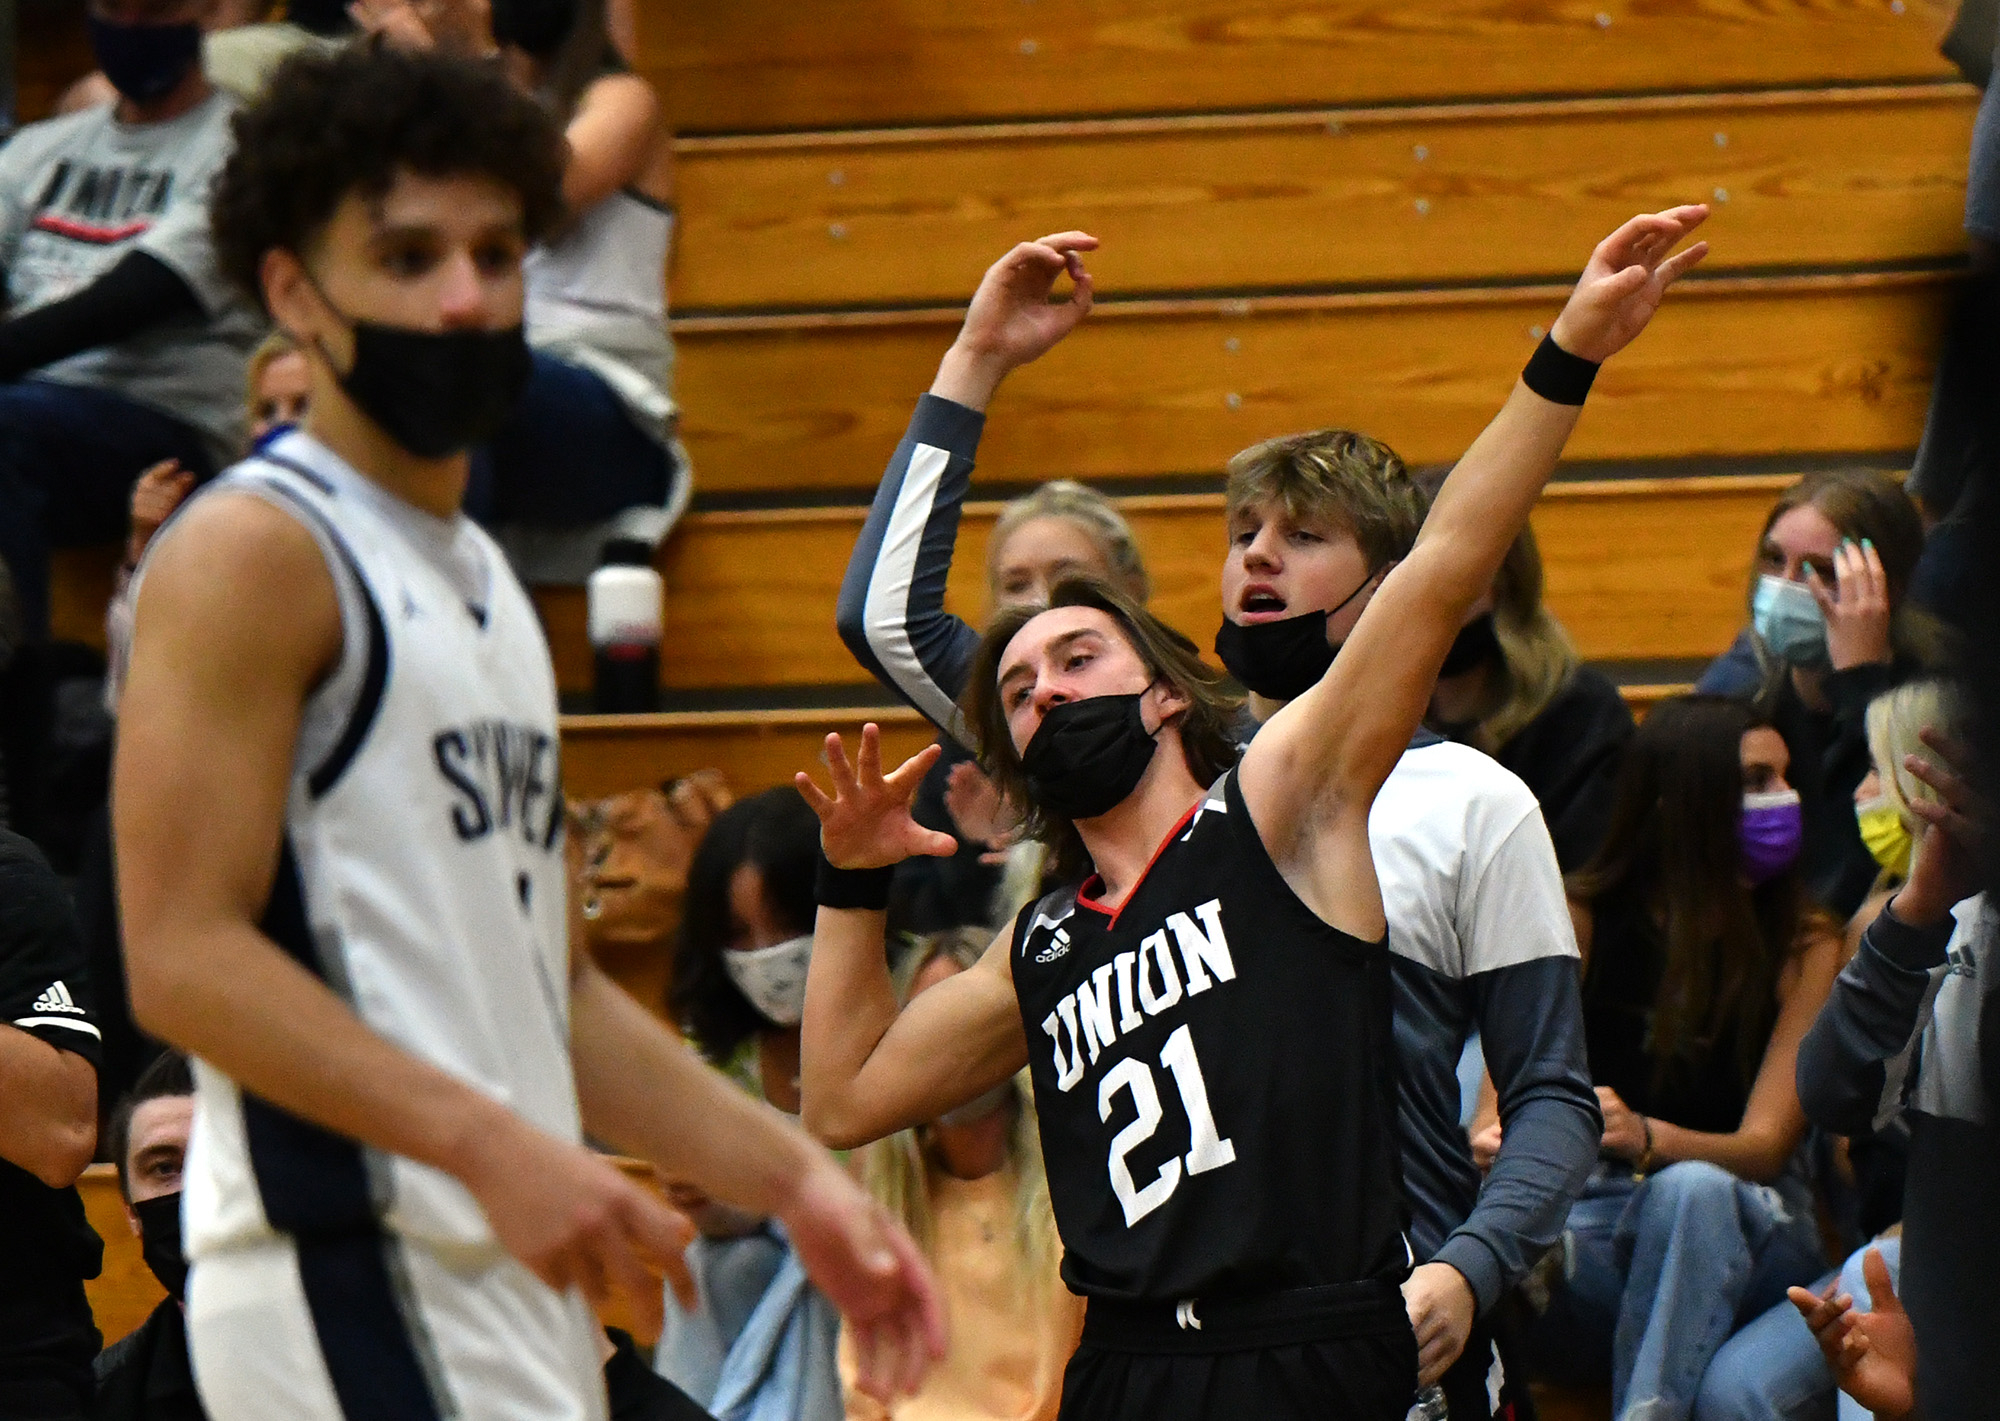 Union High School senior Cole Rebman, 21, celebrates a three point shot Tuesday, April 27, 2021, during the TitanÕs 79-71 win against Skyview High School at Skyview.